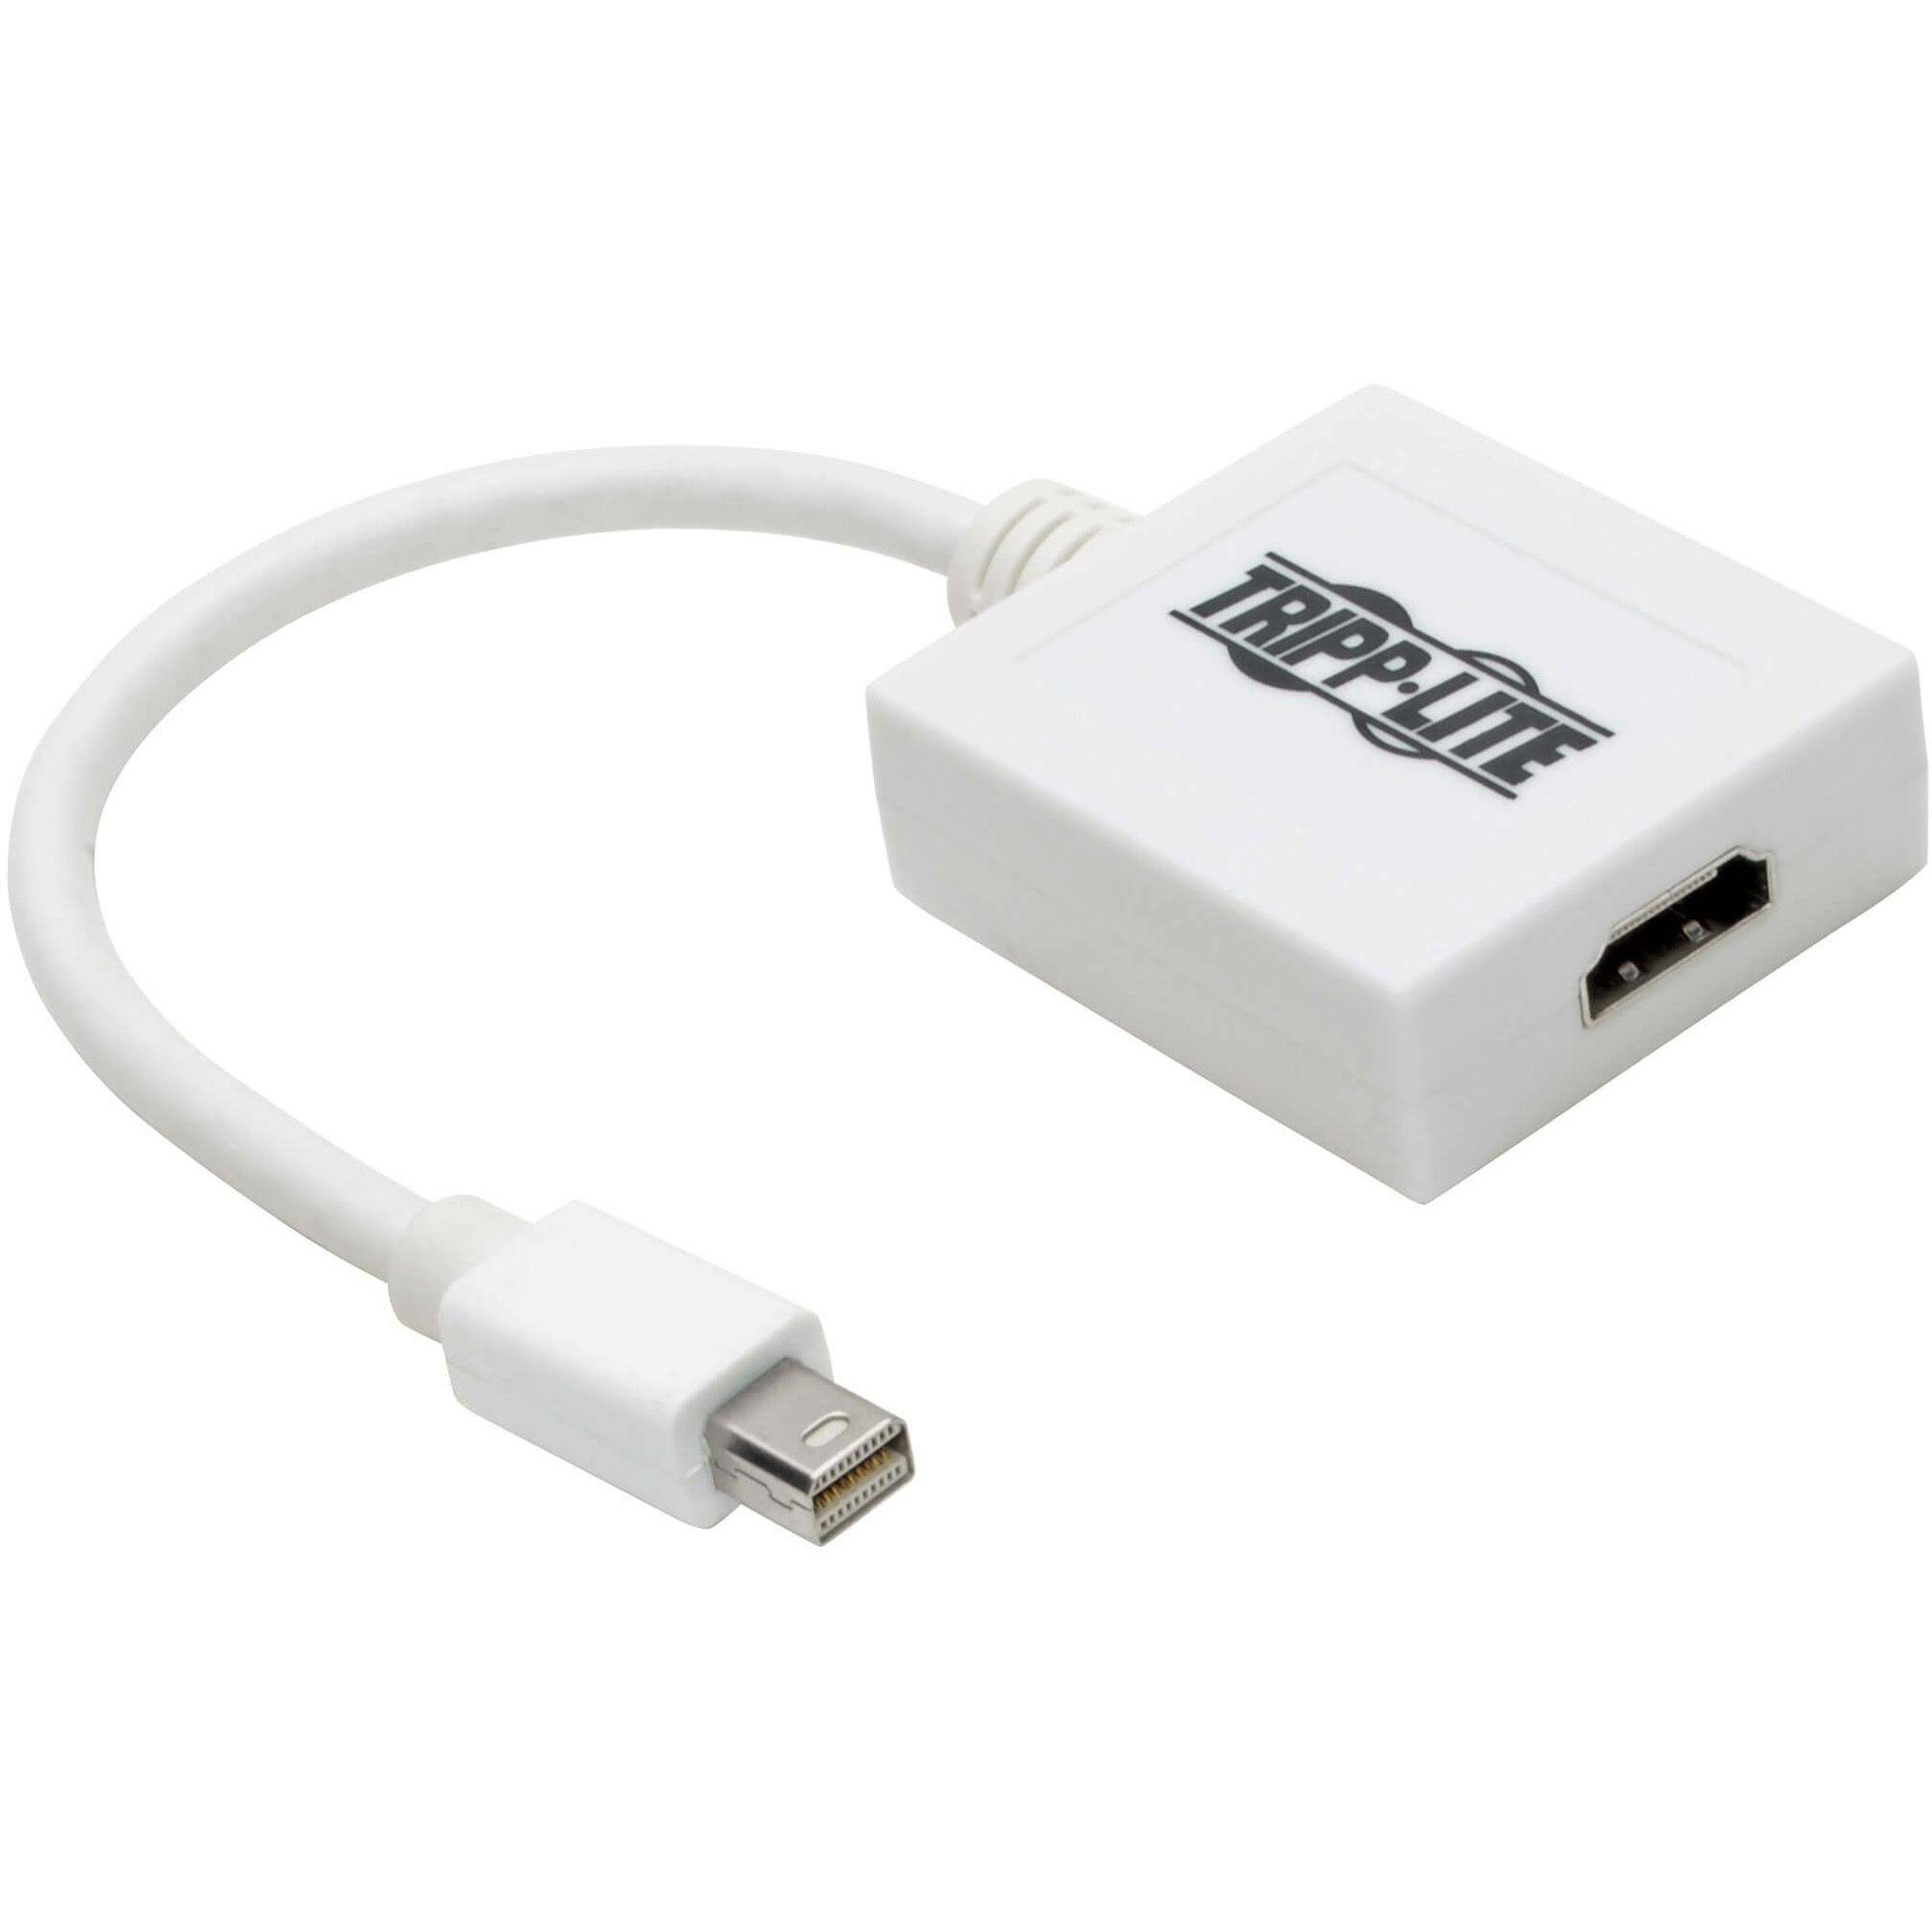 Tripp Lite Mini Display Port to HDMI Adapter Cable - White